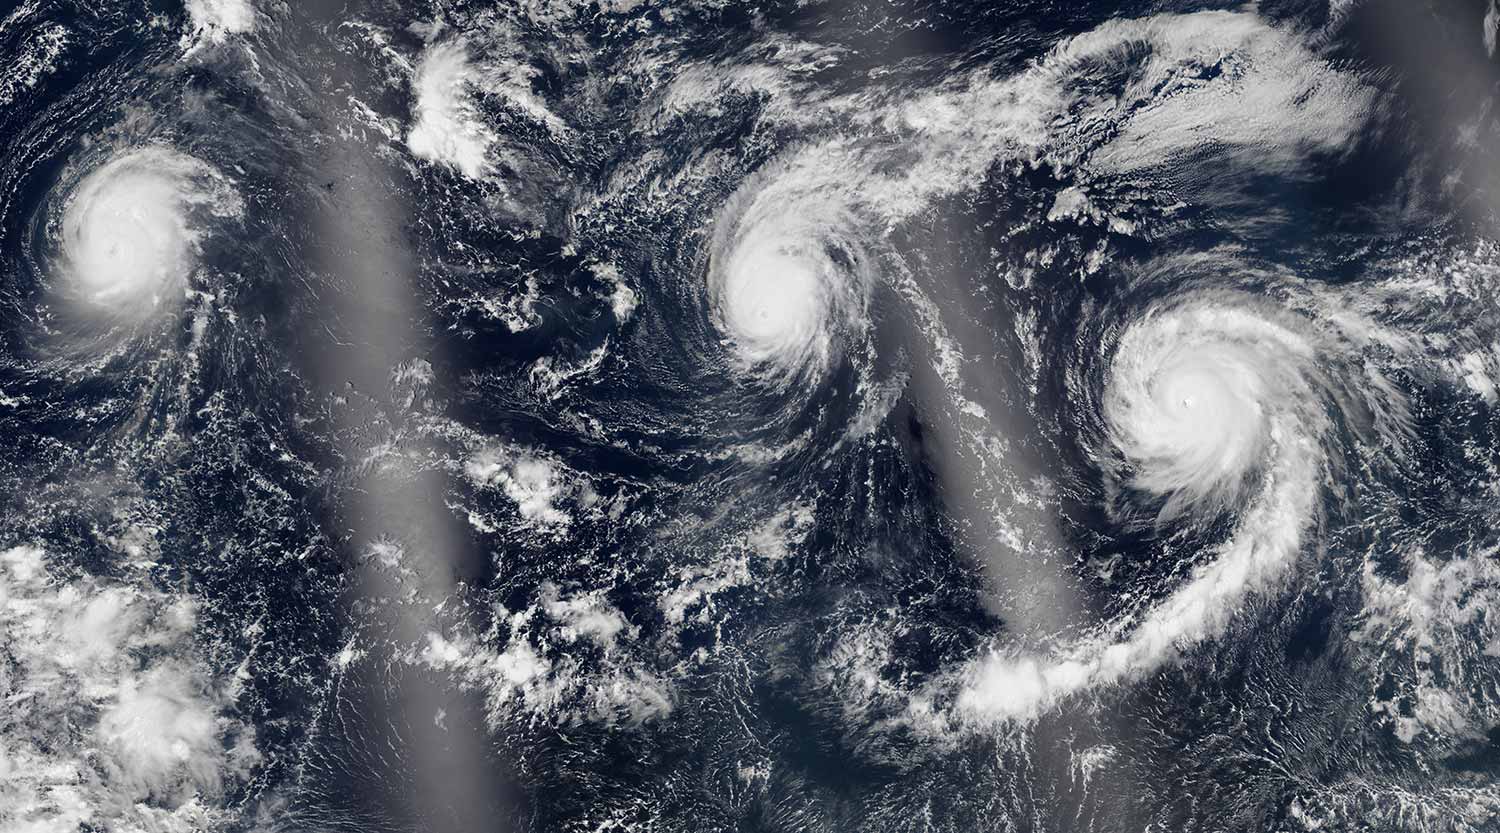 Image:For the first time in recorded history, three category-4 hurricanes formed in the Pacific Ocean in August. Photo: NASA Earth Observatory